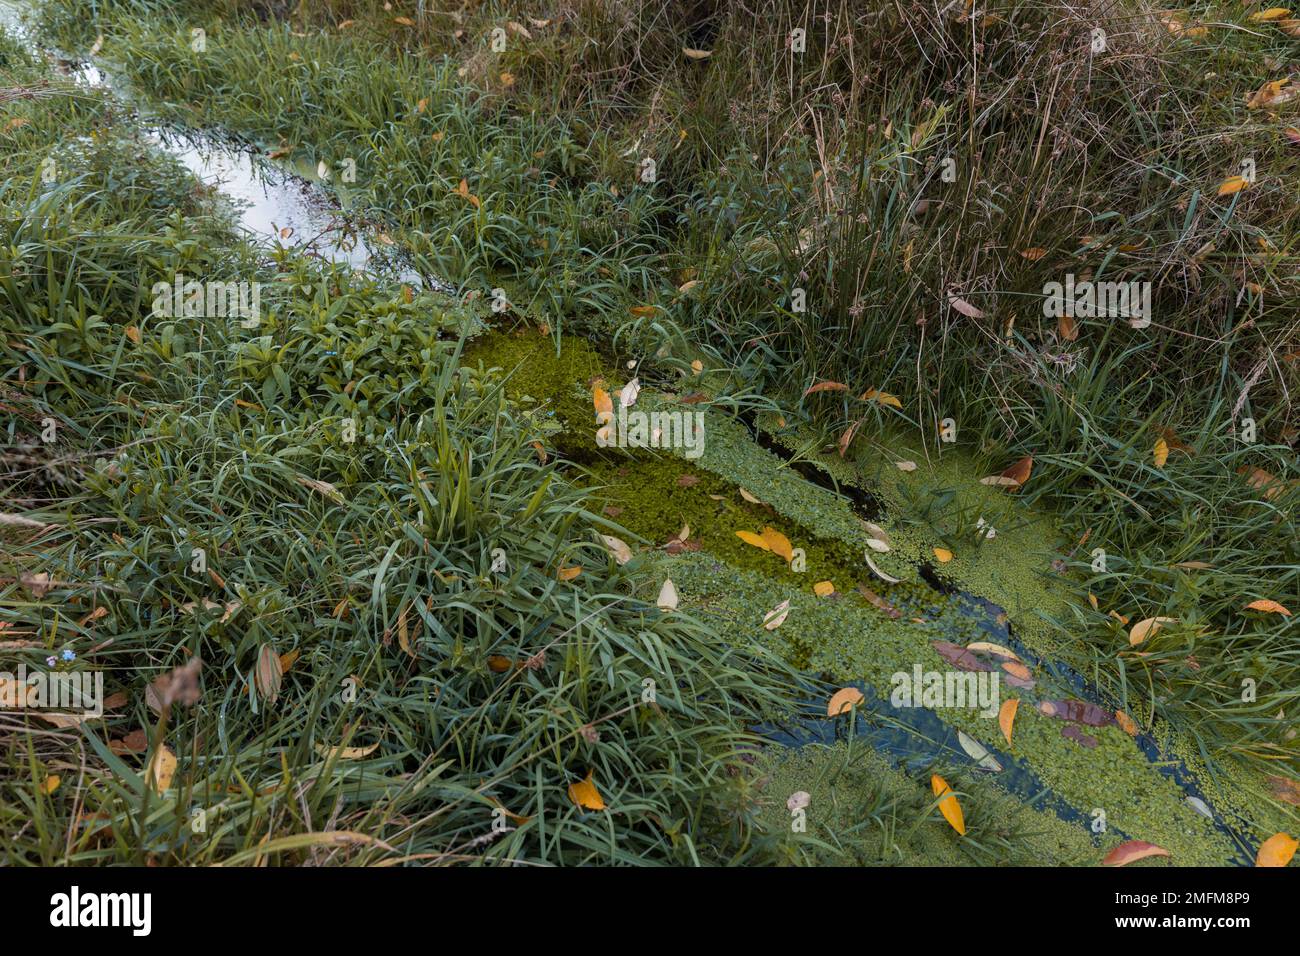 Duckweed, close-up of a plant in an aquatic environment. Autumn fallen leaves. Stock Photo